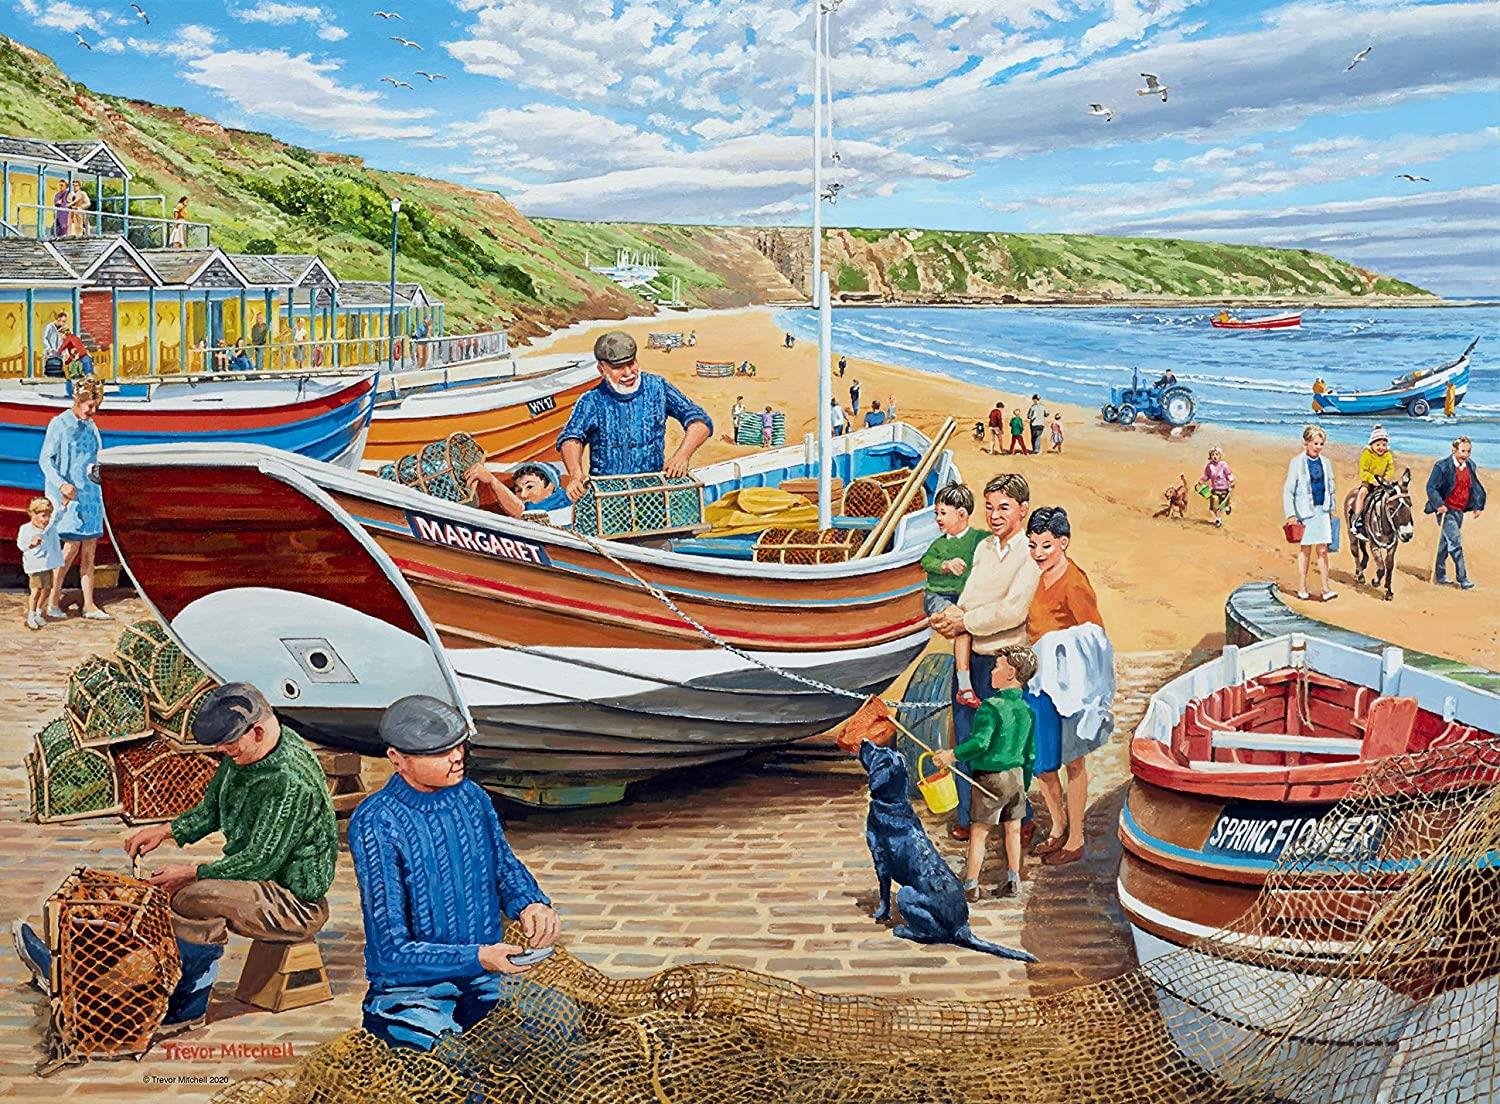 Ravensburger Happy Days at Work, The Fisherman Jigsaw Puzzle (500 Pieces)